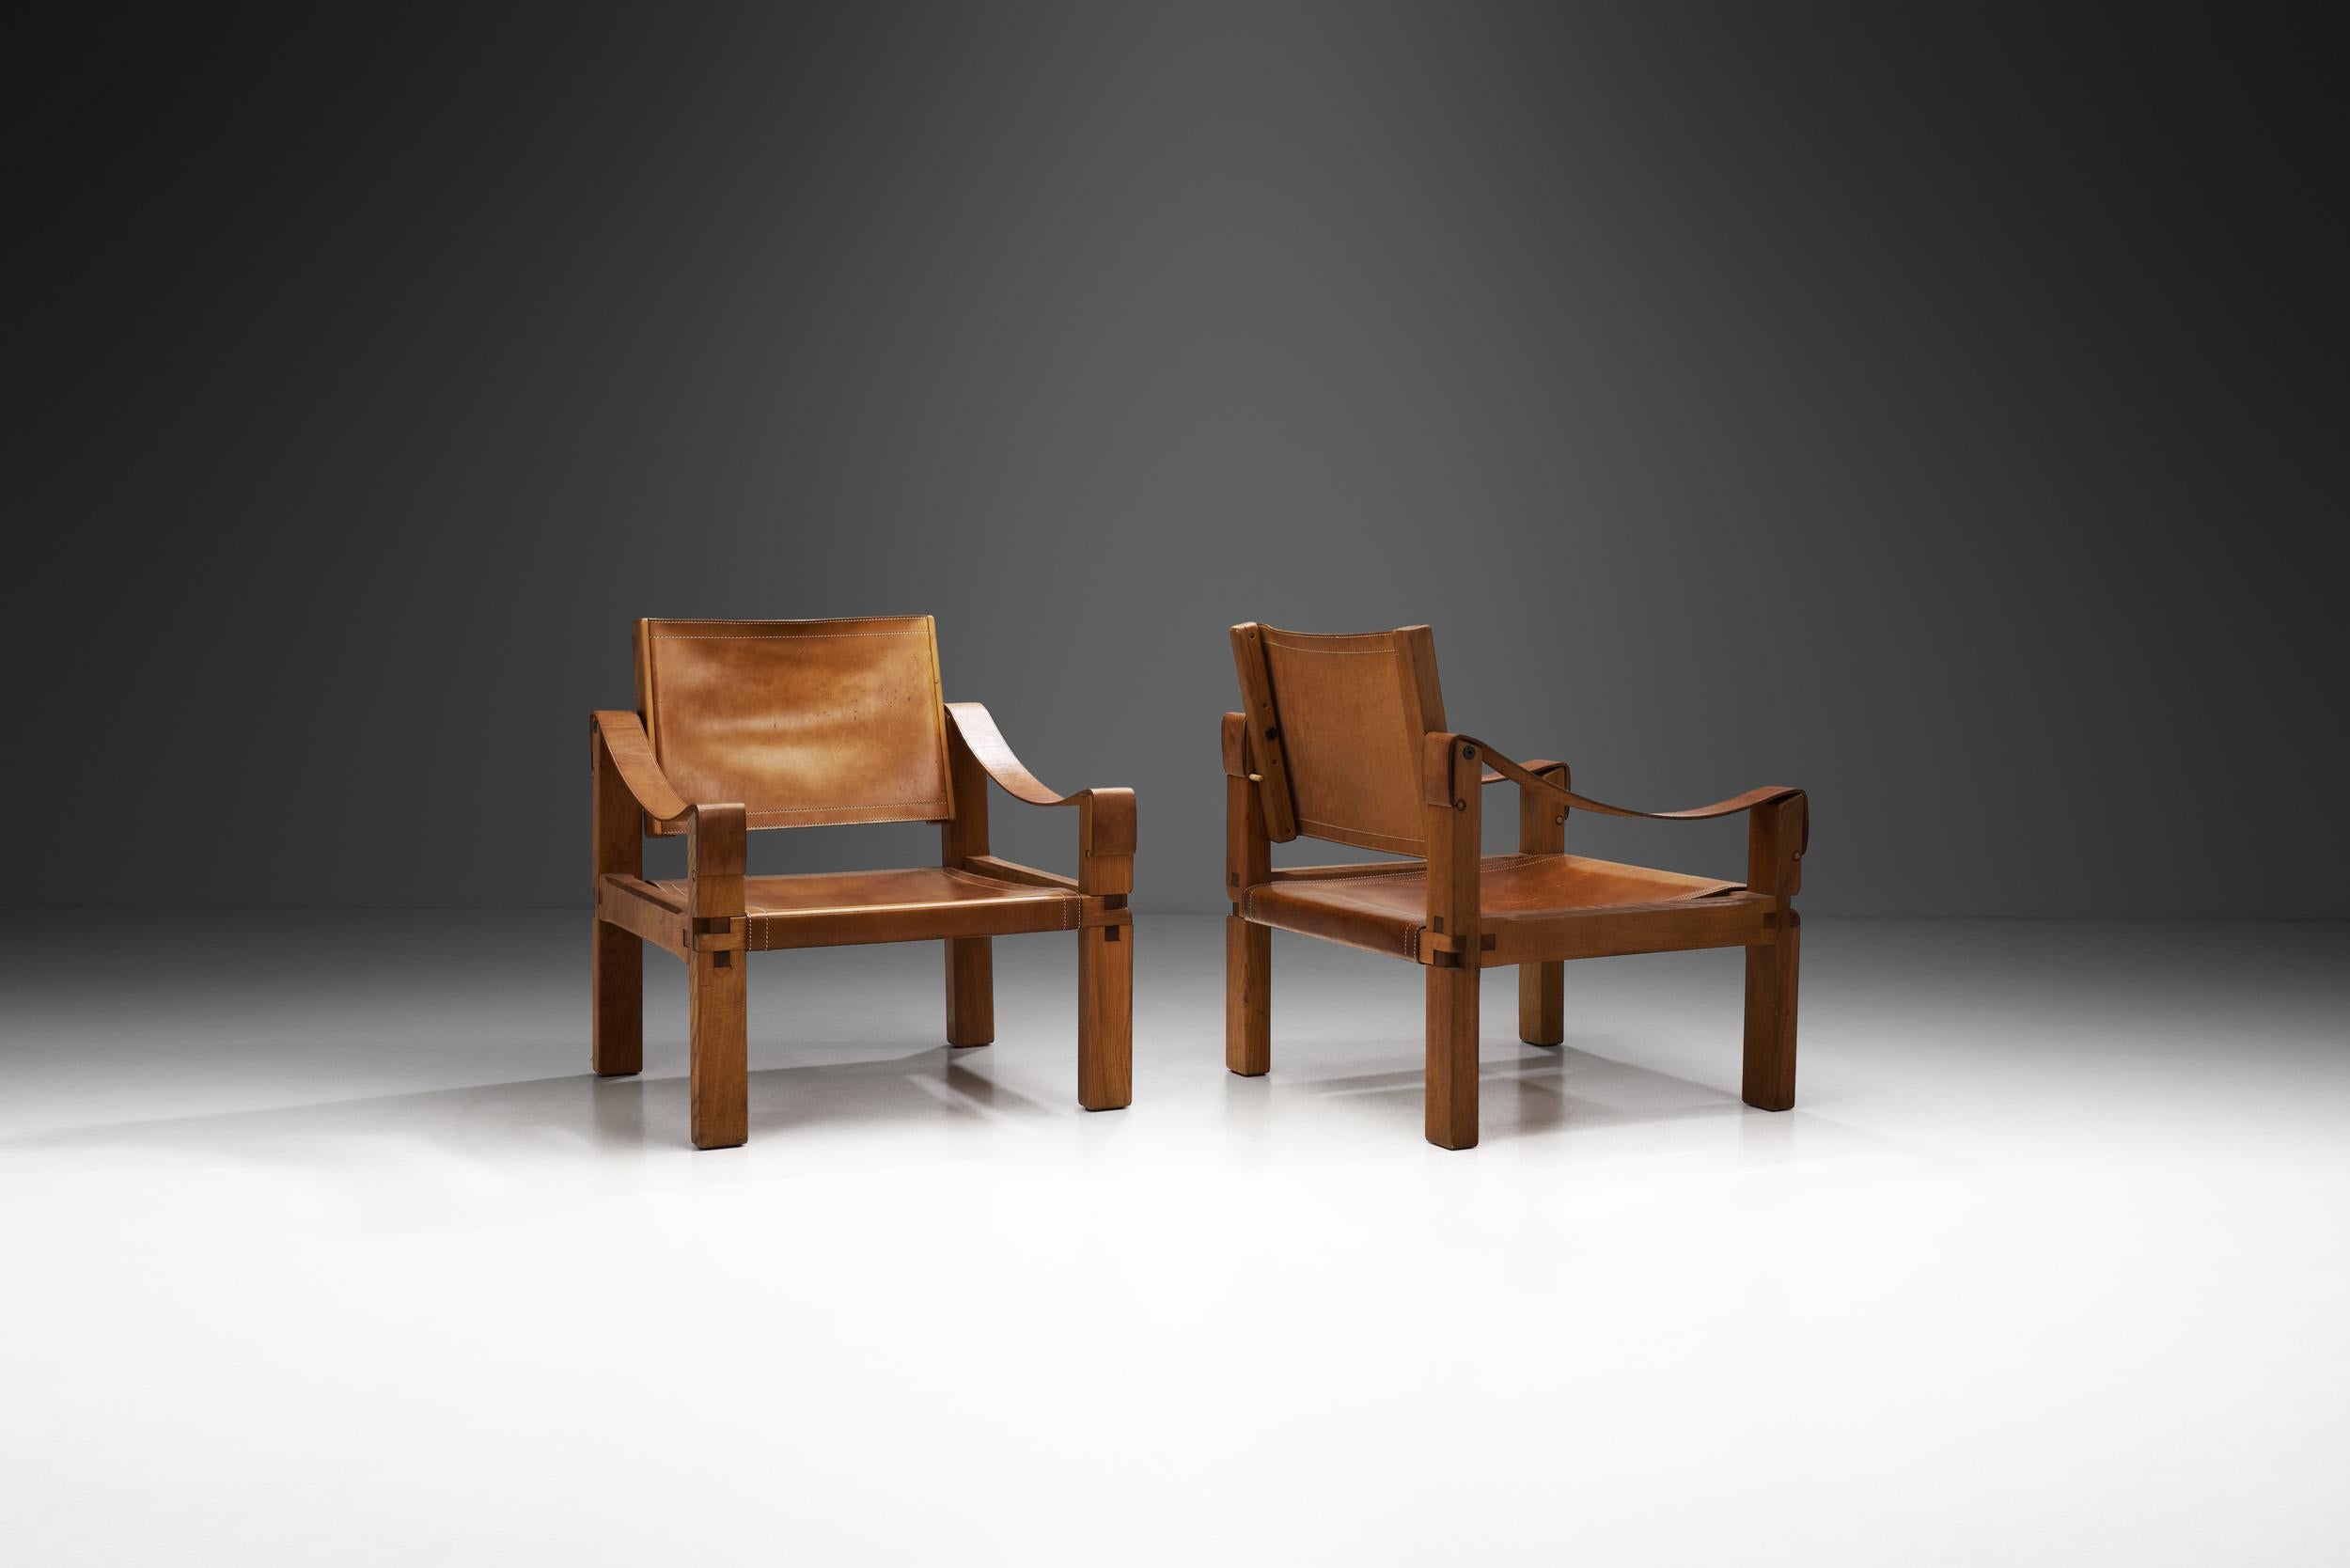 The “S10” model, also known as the “Sahara” chair, was designed in 1964, and is without a doubt one of the most elemental works of the French designer, architect, and craftsman, Pierre Chapo. This pair from his X series delivers a generous, honest